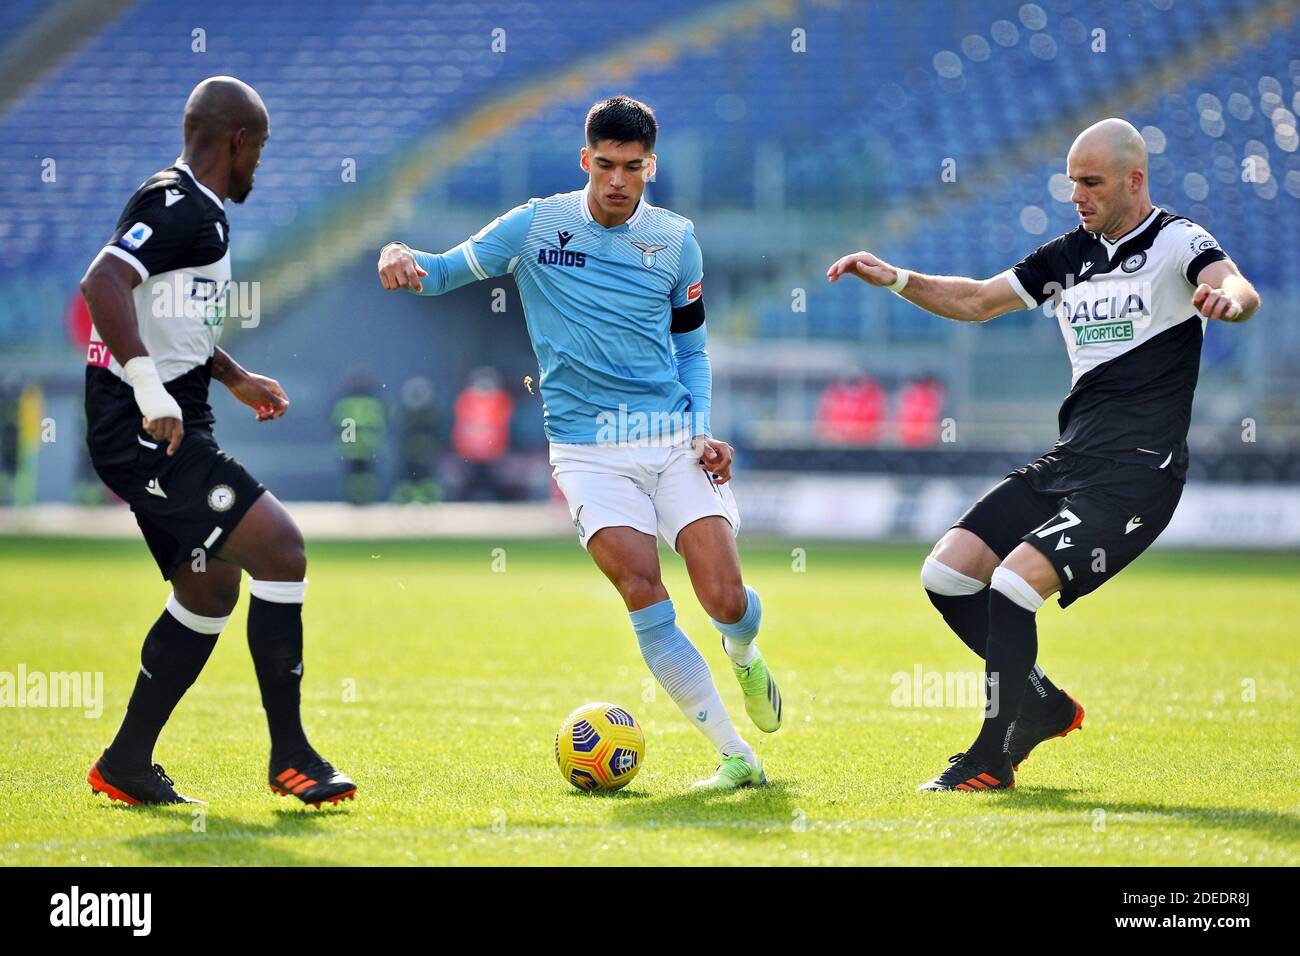 Joaquin Correa of Lazio (C) vies for the ball with Samir (L) and Bram Nuytinck (R) during the Italian championship Serie A  / LM Stock Photo